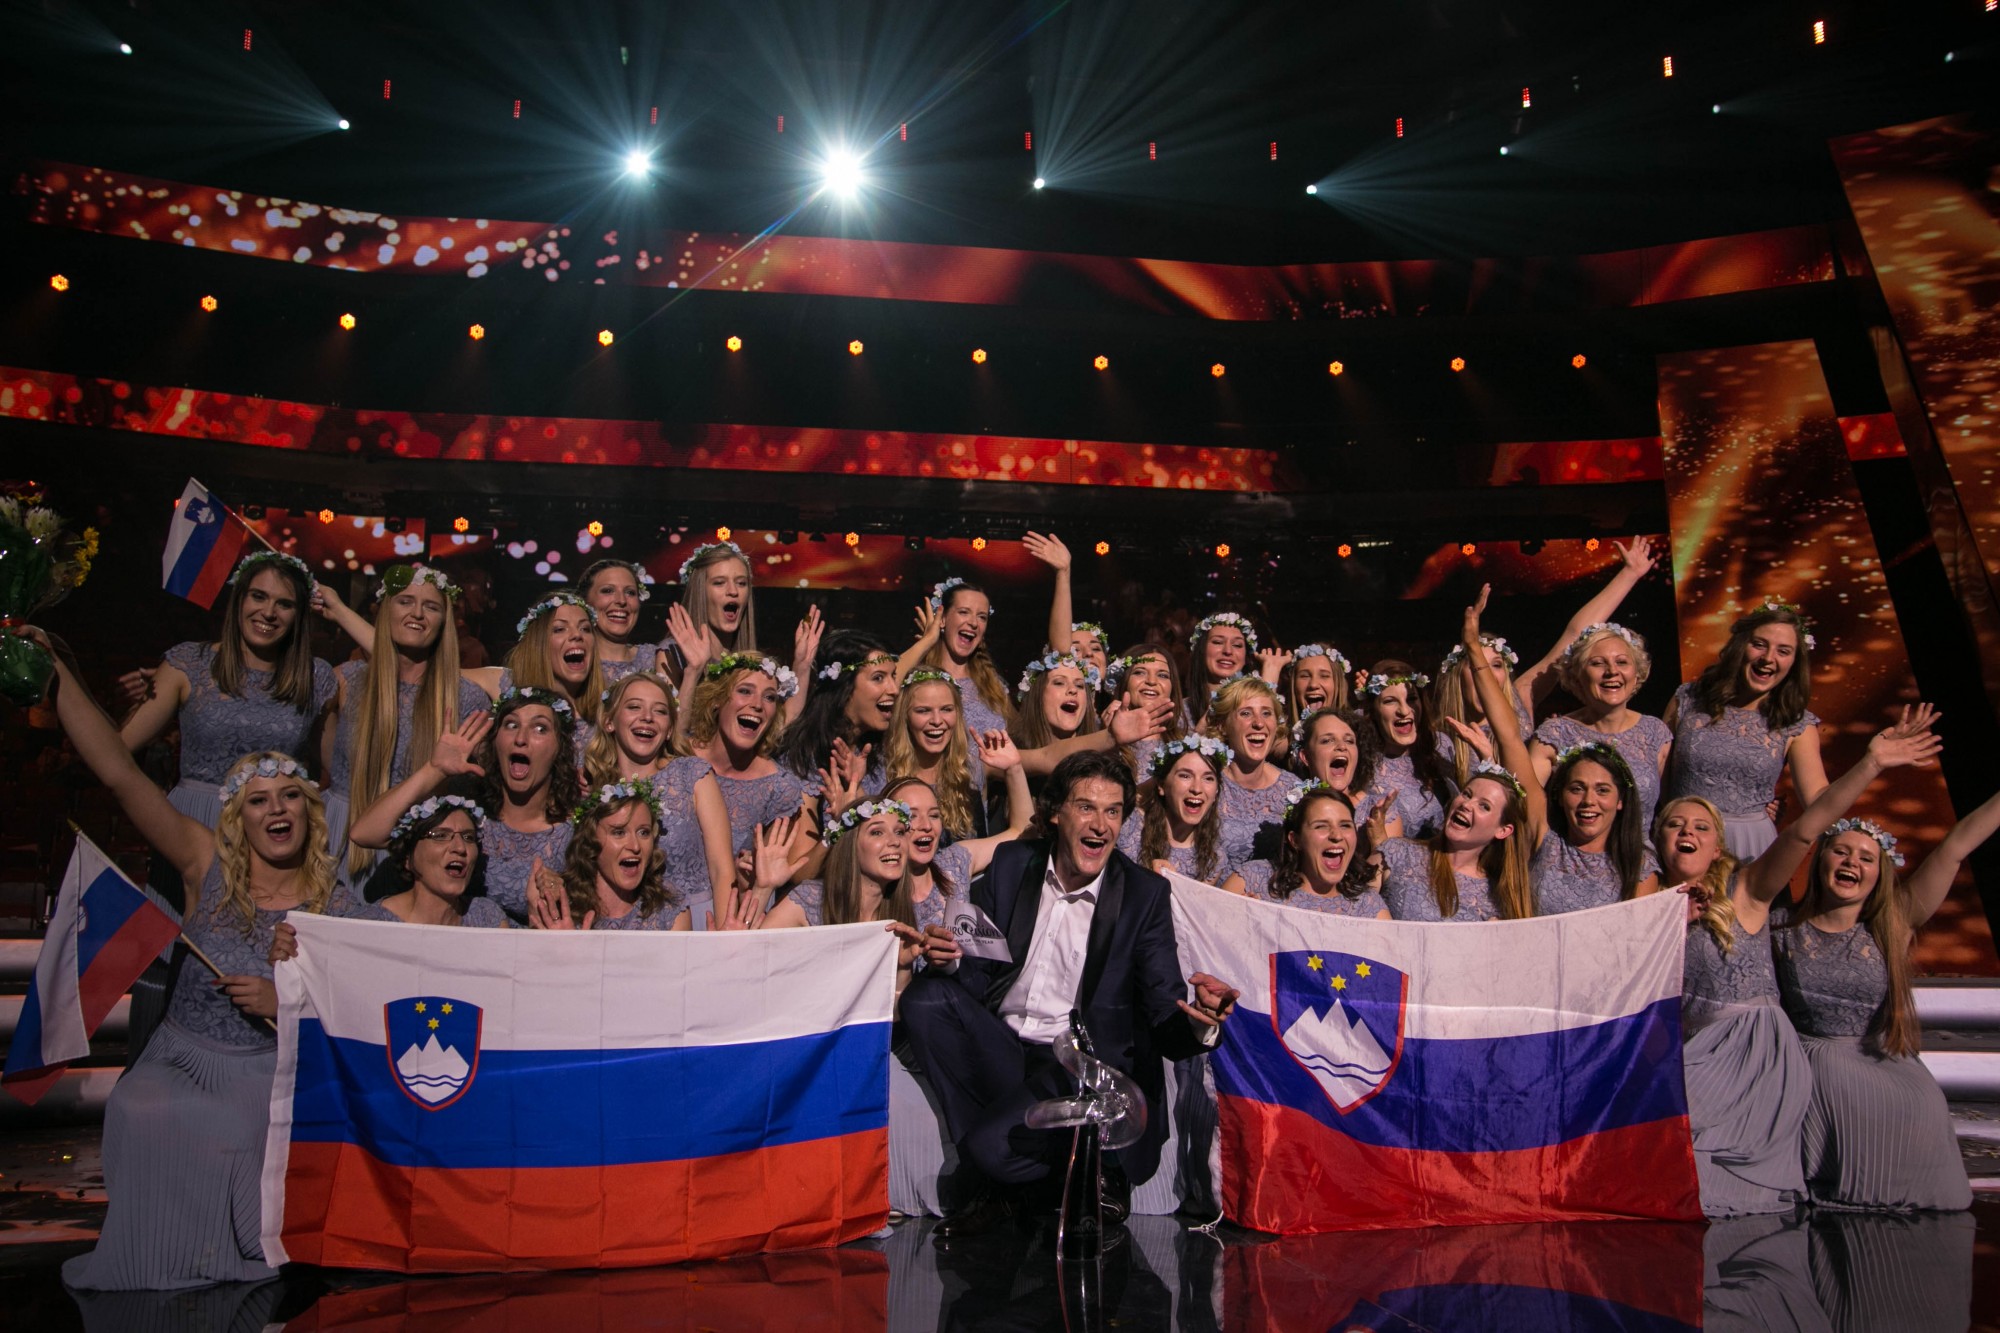 Next Eurovision Choir of the Year will travel to Sweden in 2019